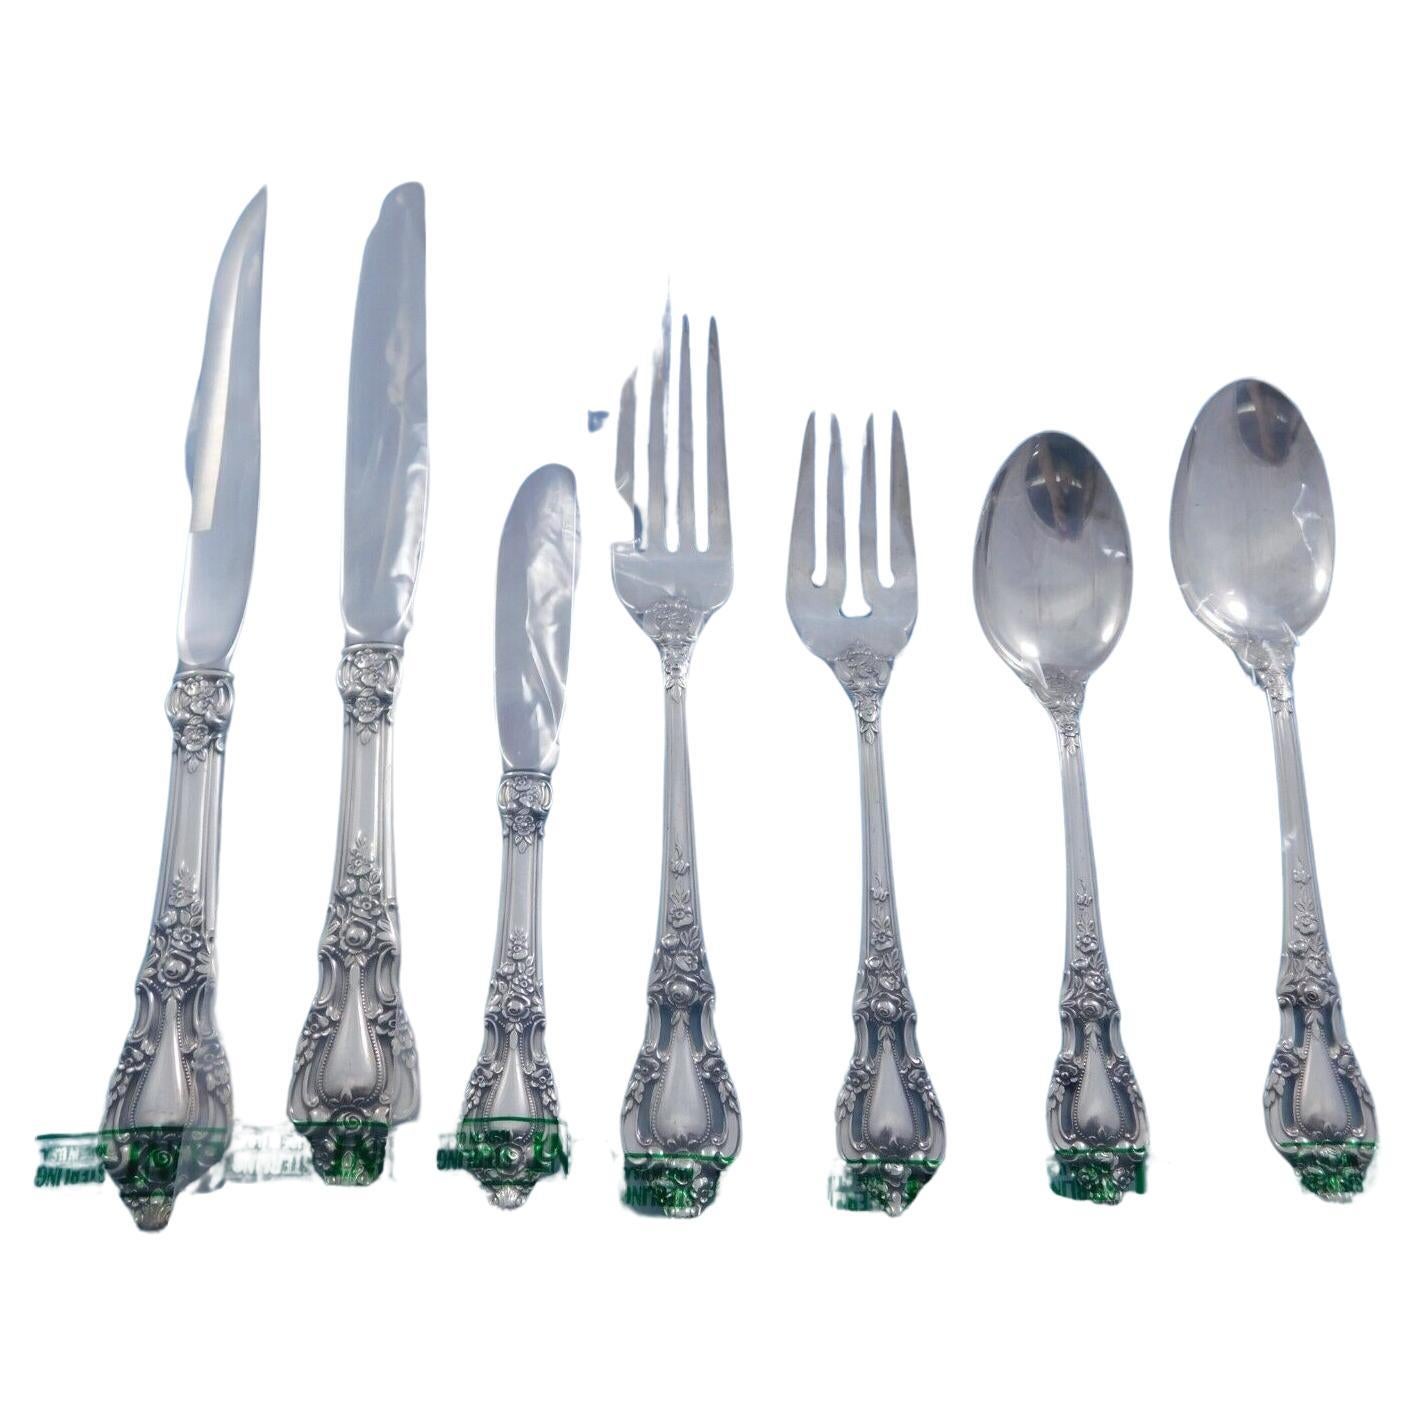 Eloquence by Lunt Sterling Silver Flatware Set for 8 Service 58 pieces New For Sale